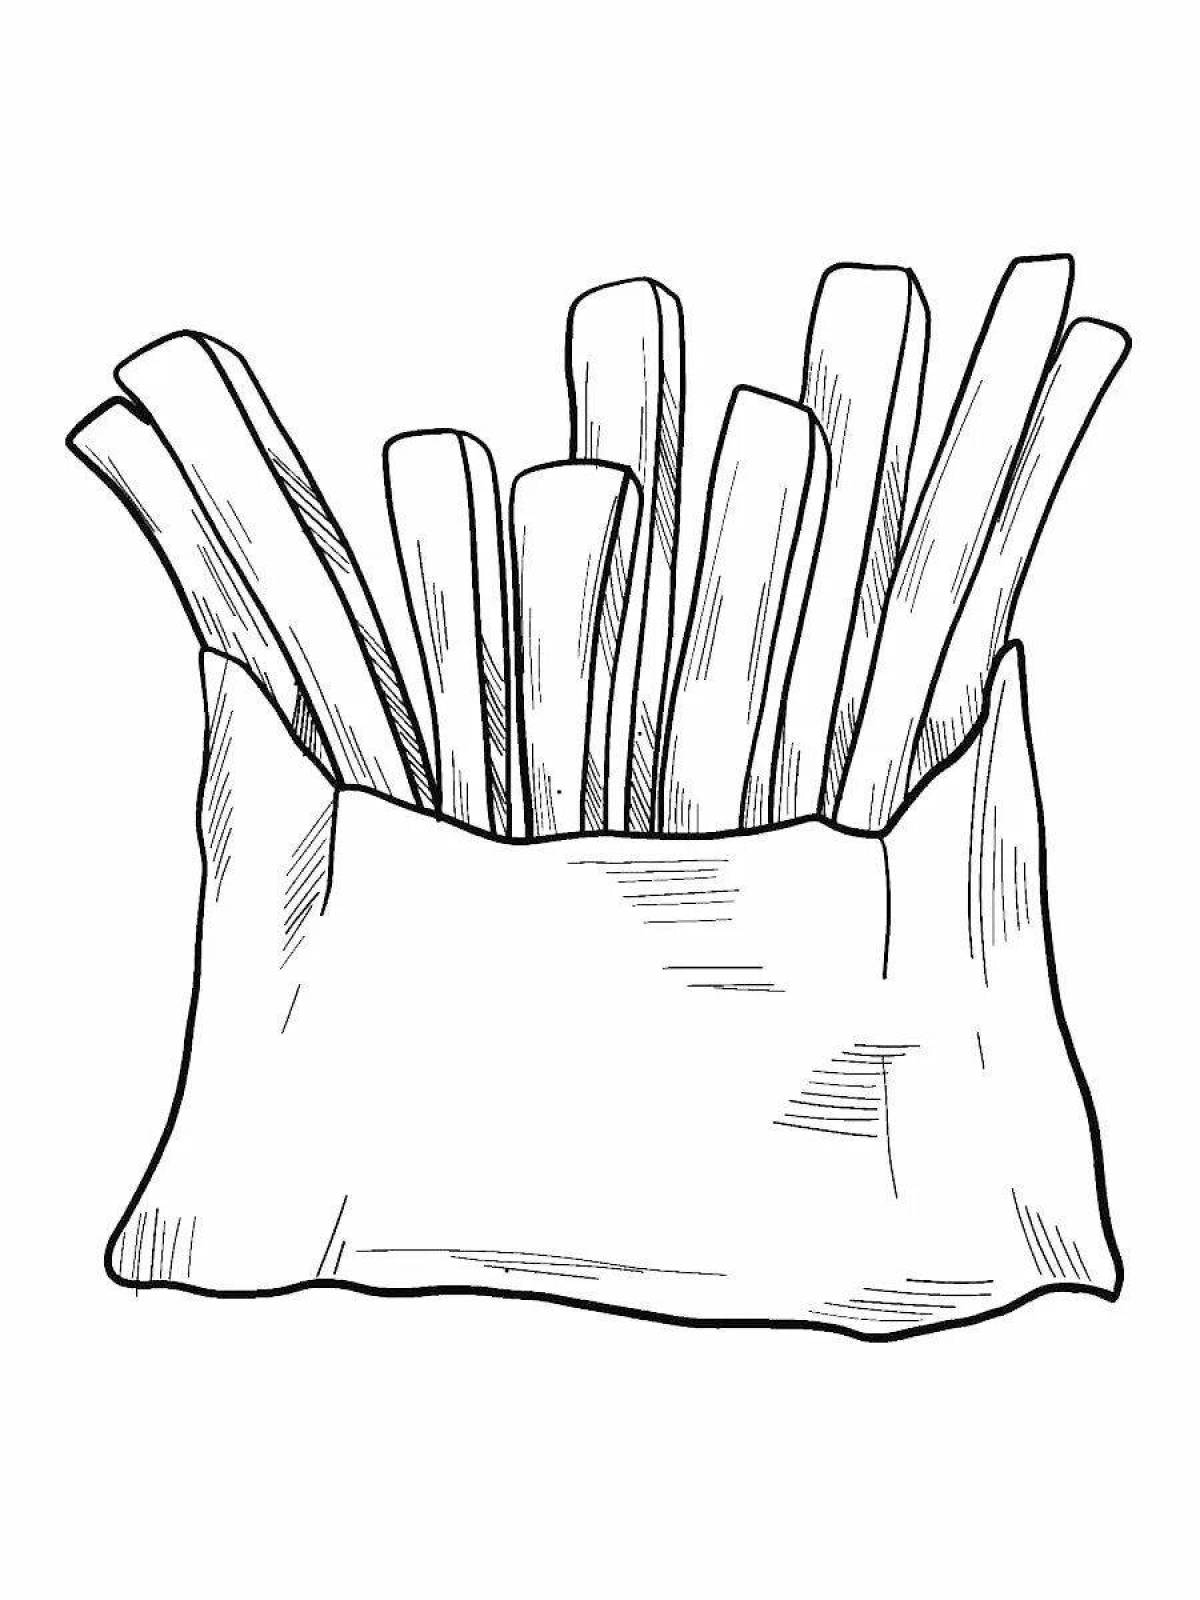 Fun french fries coloring book for kids